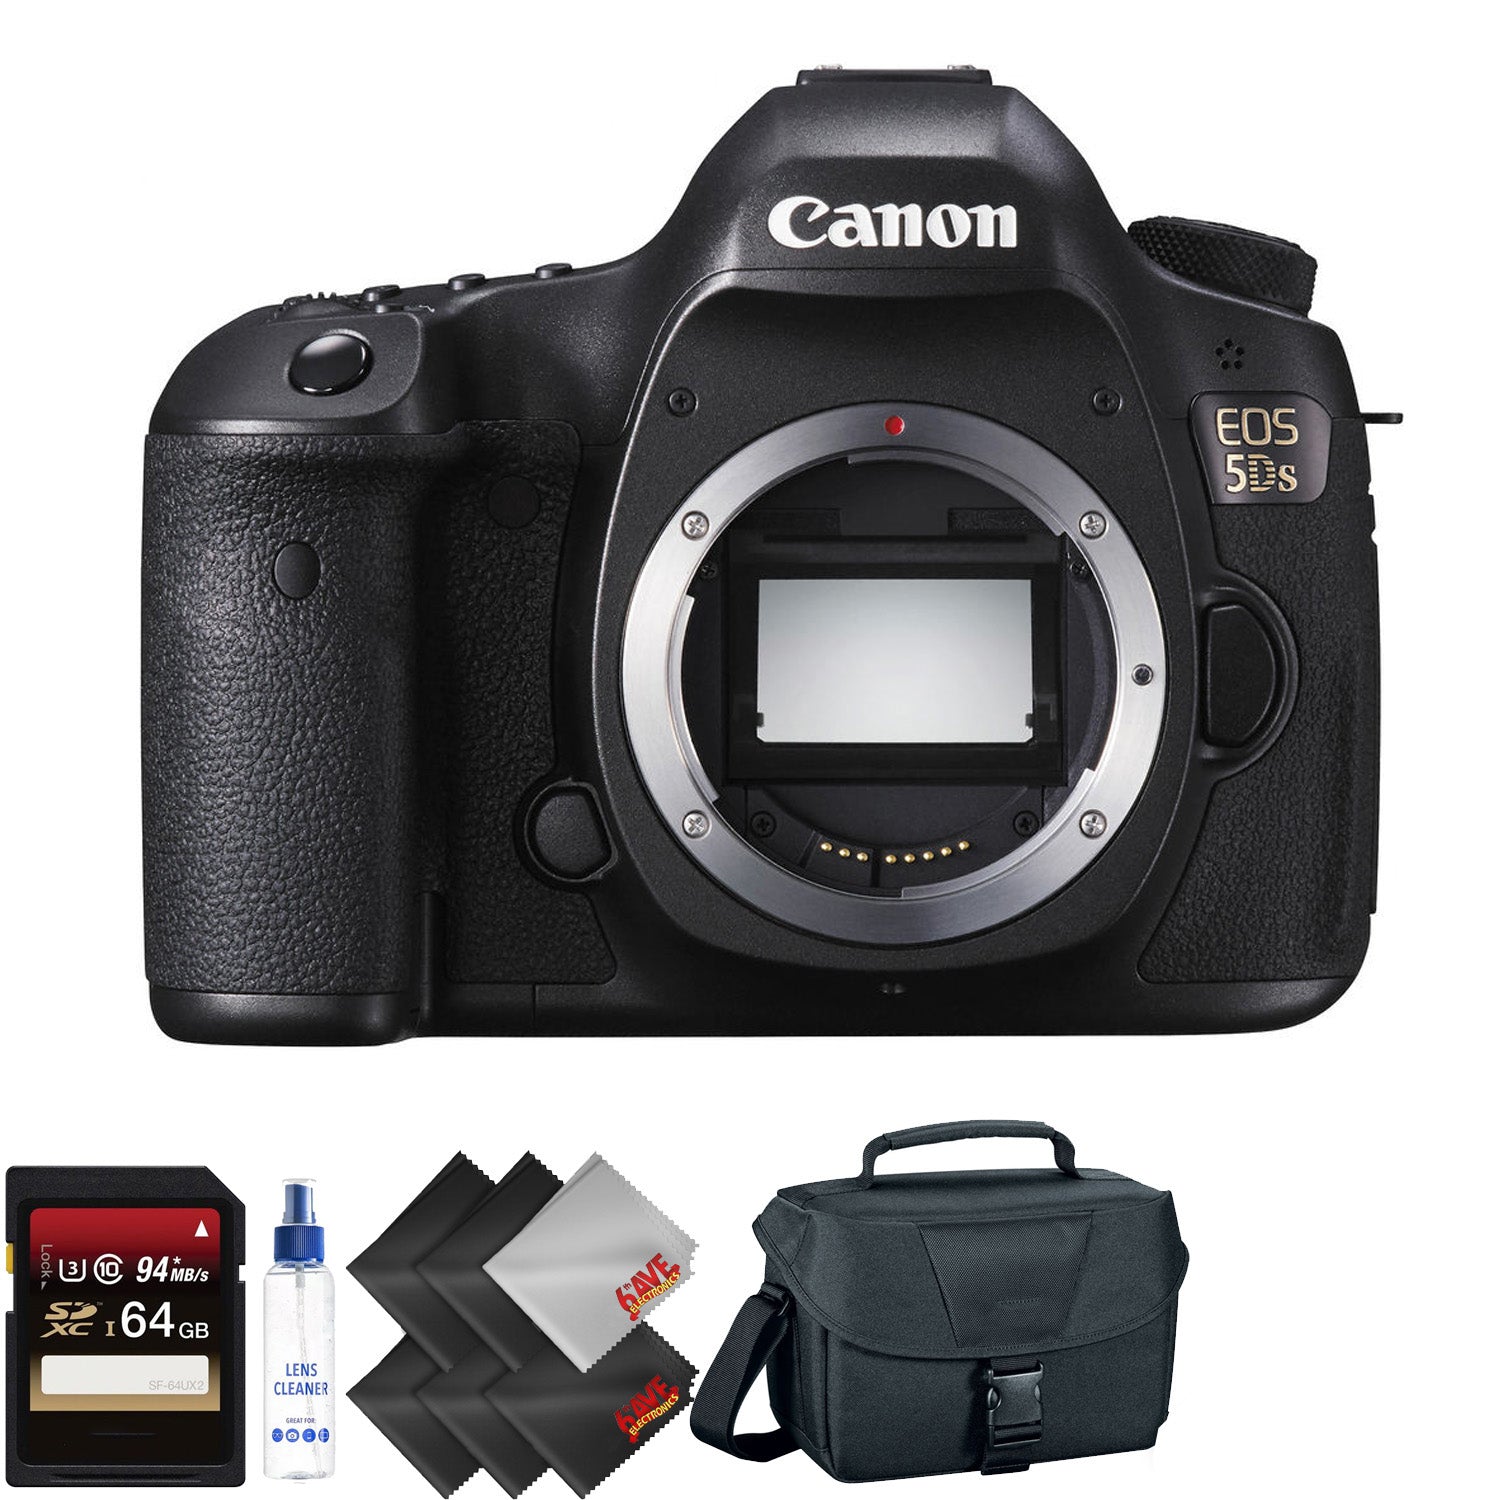 Canon EOS 5DS DSLR Camera (Body Only) + 64GB Memory Card + 1 Year Warranty Ultimate Bundle